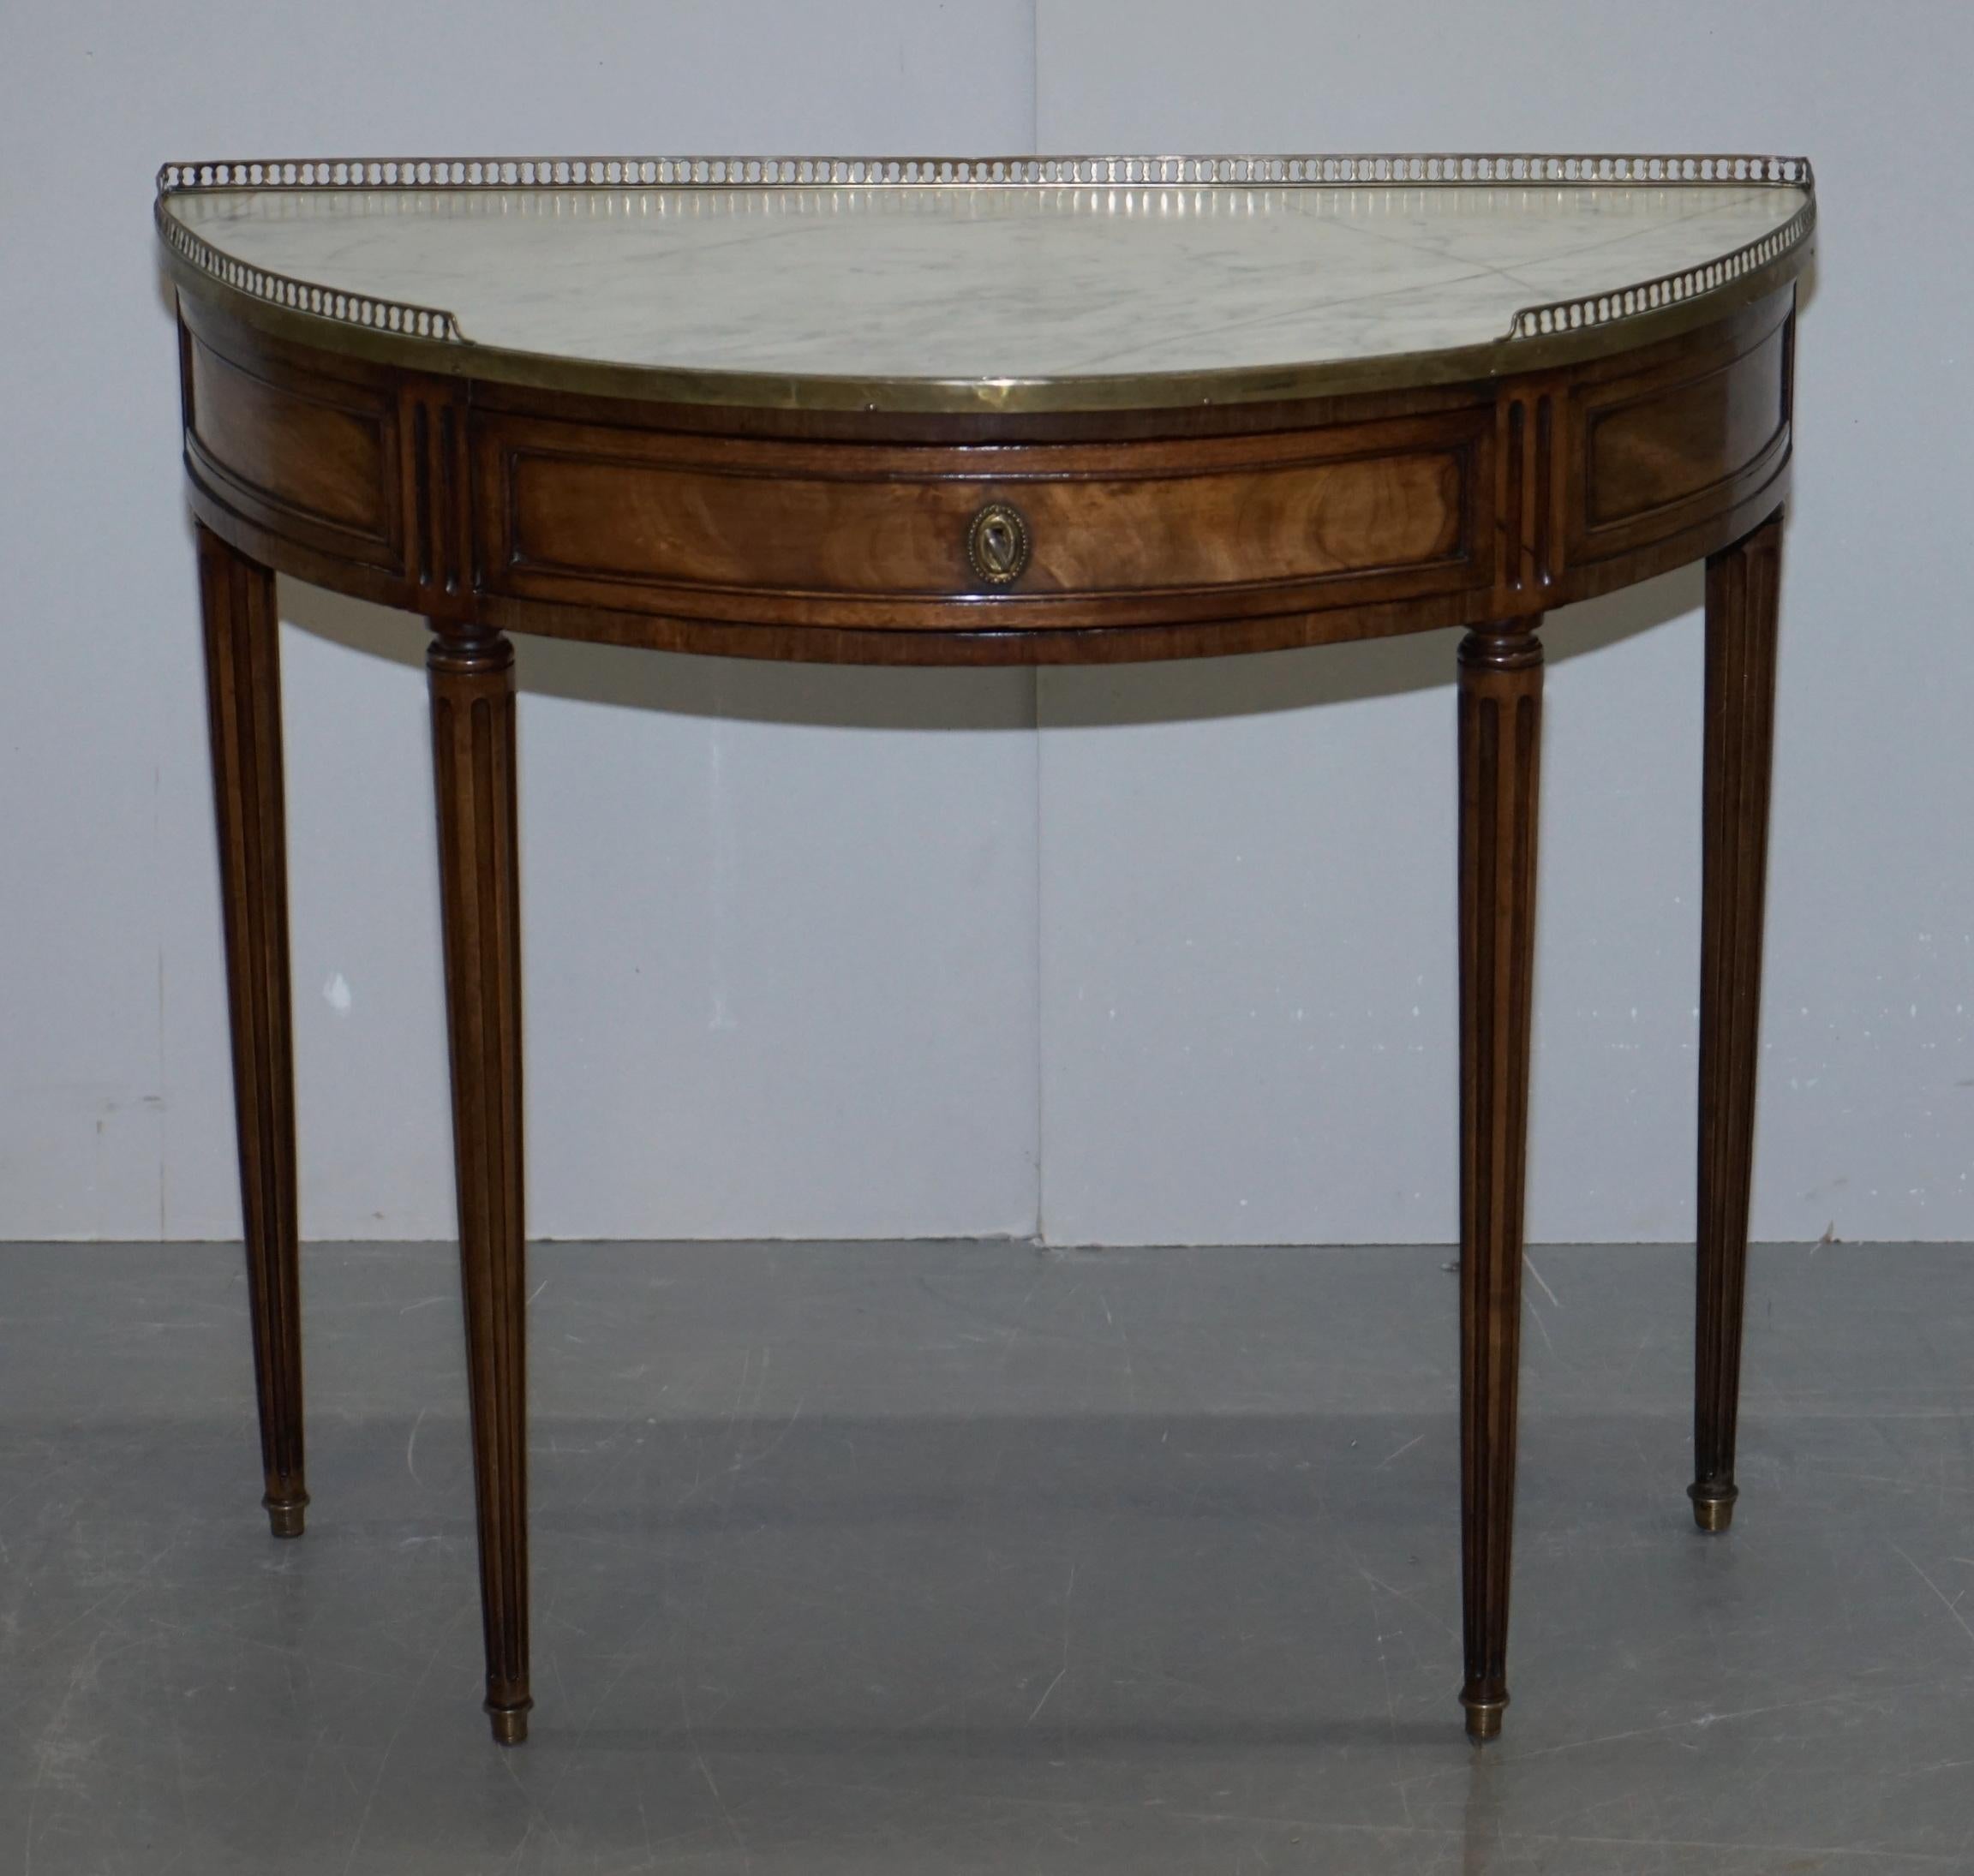 We are delighted to offer this lovely Victorian circa 1880 walnut demilune console table with original marble top surmounted by a brass gallery rail

A very decorative and well made mid Victorian period table. It’s a nice size, very much of medium